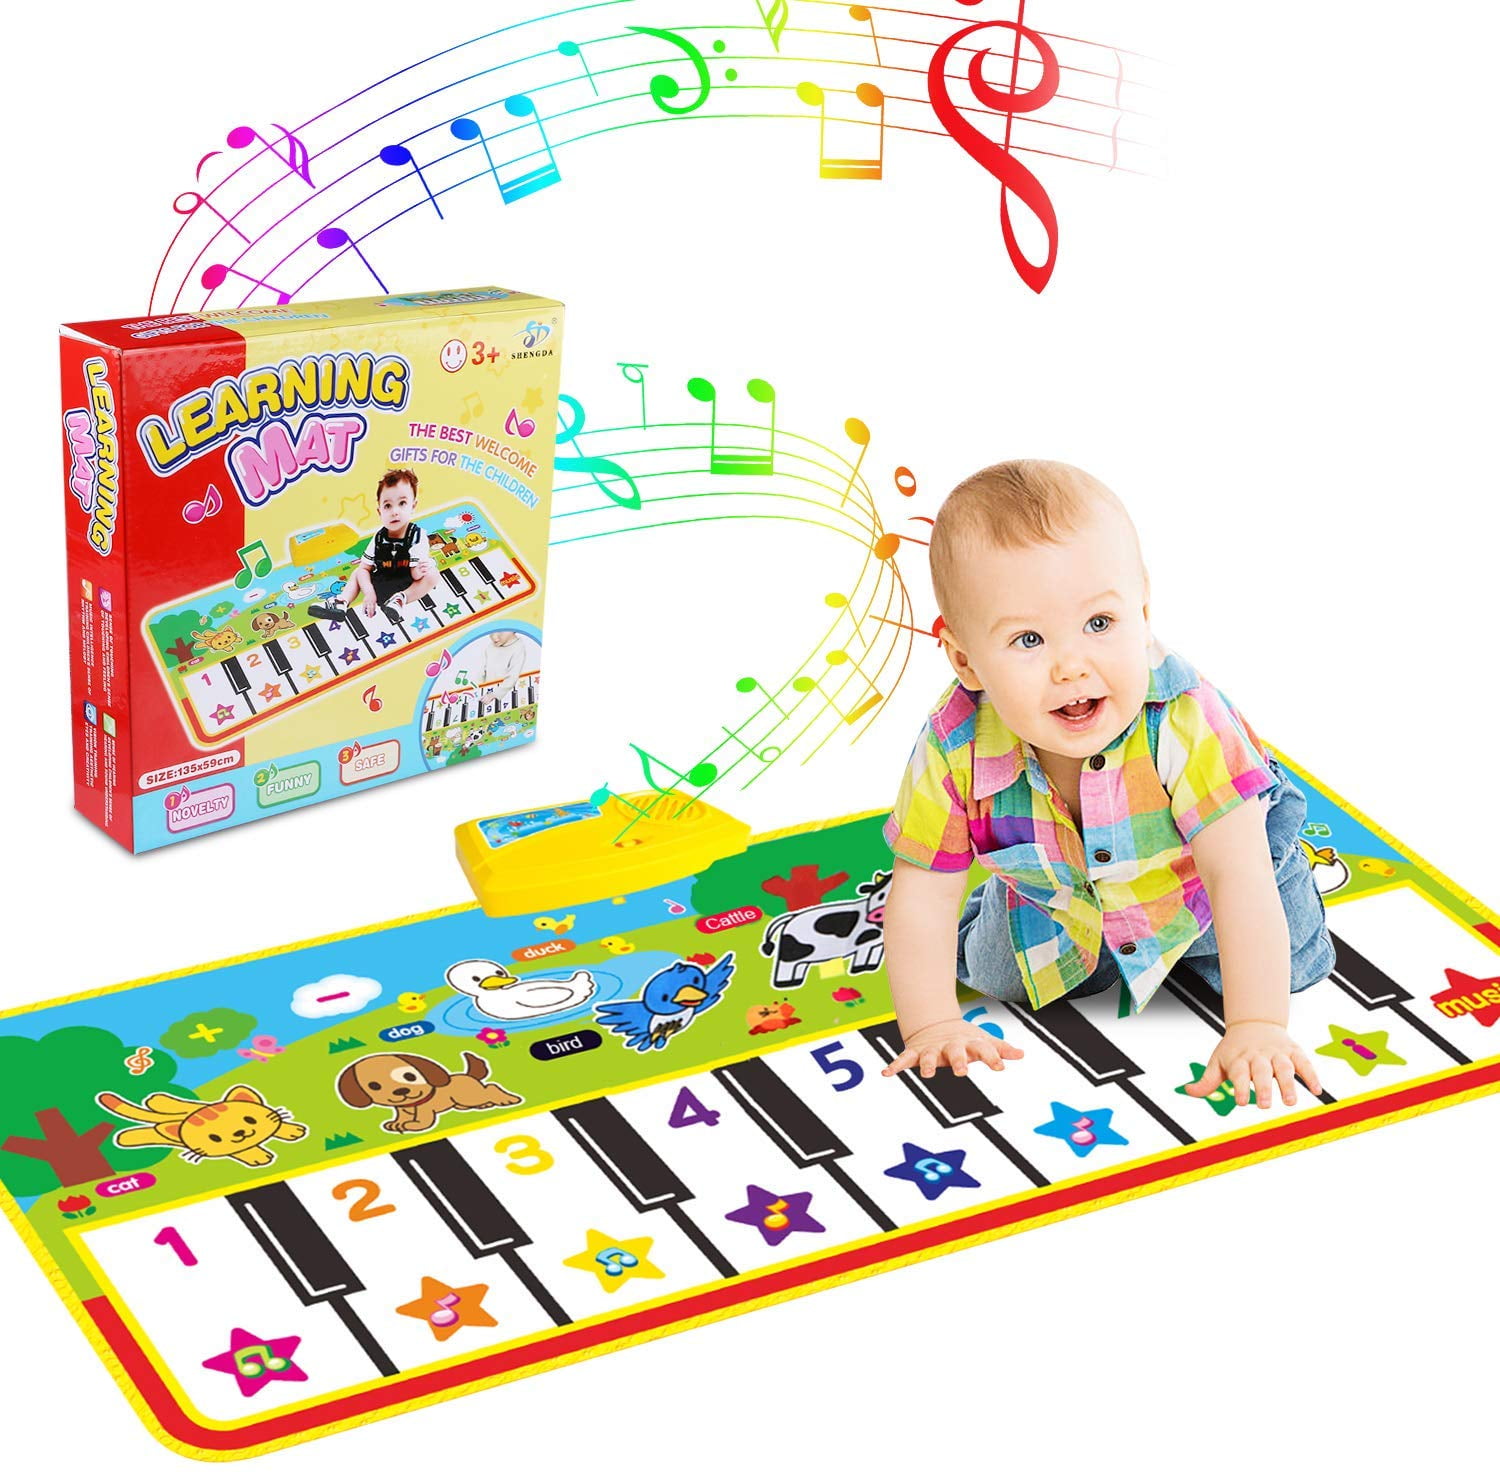 Musical Piano Mat Keyboard Play mat Baby Early Education Music Touch Play Blanket Gifts Toys for Girls Boys Toddlers 